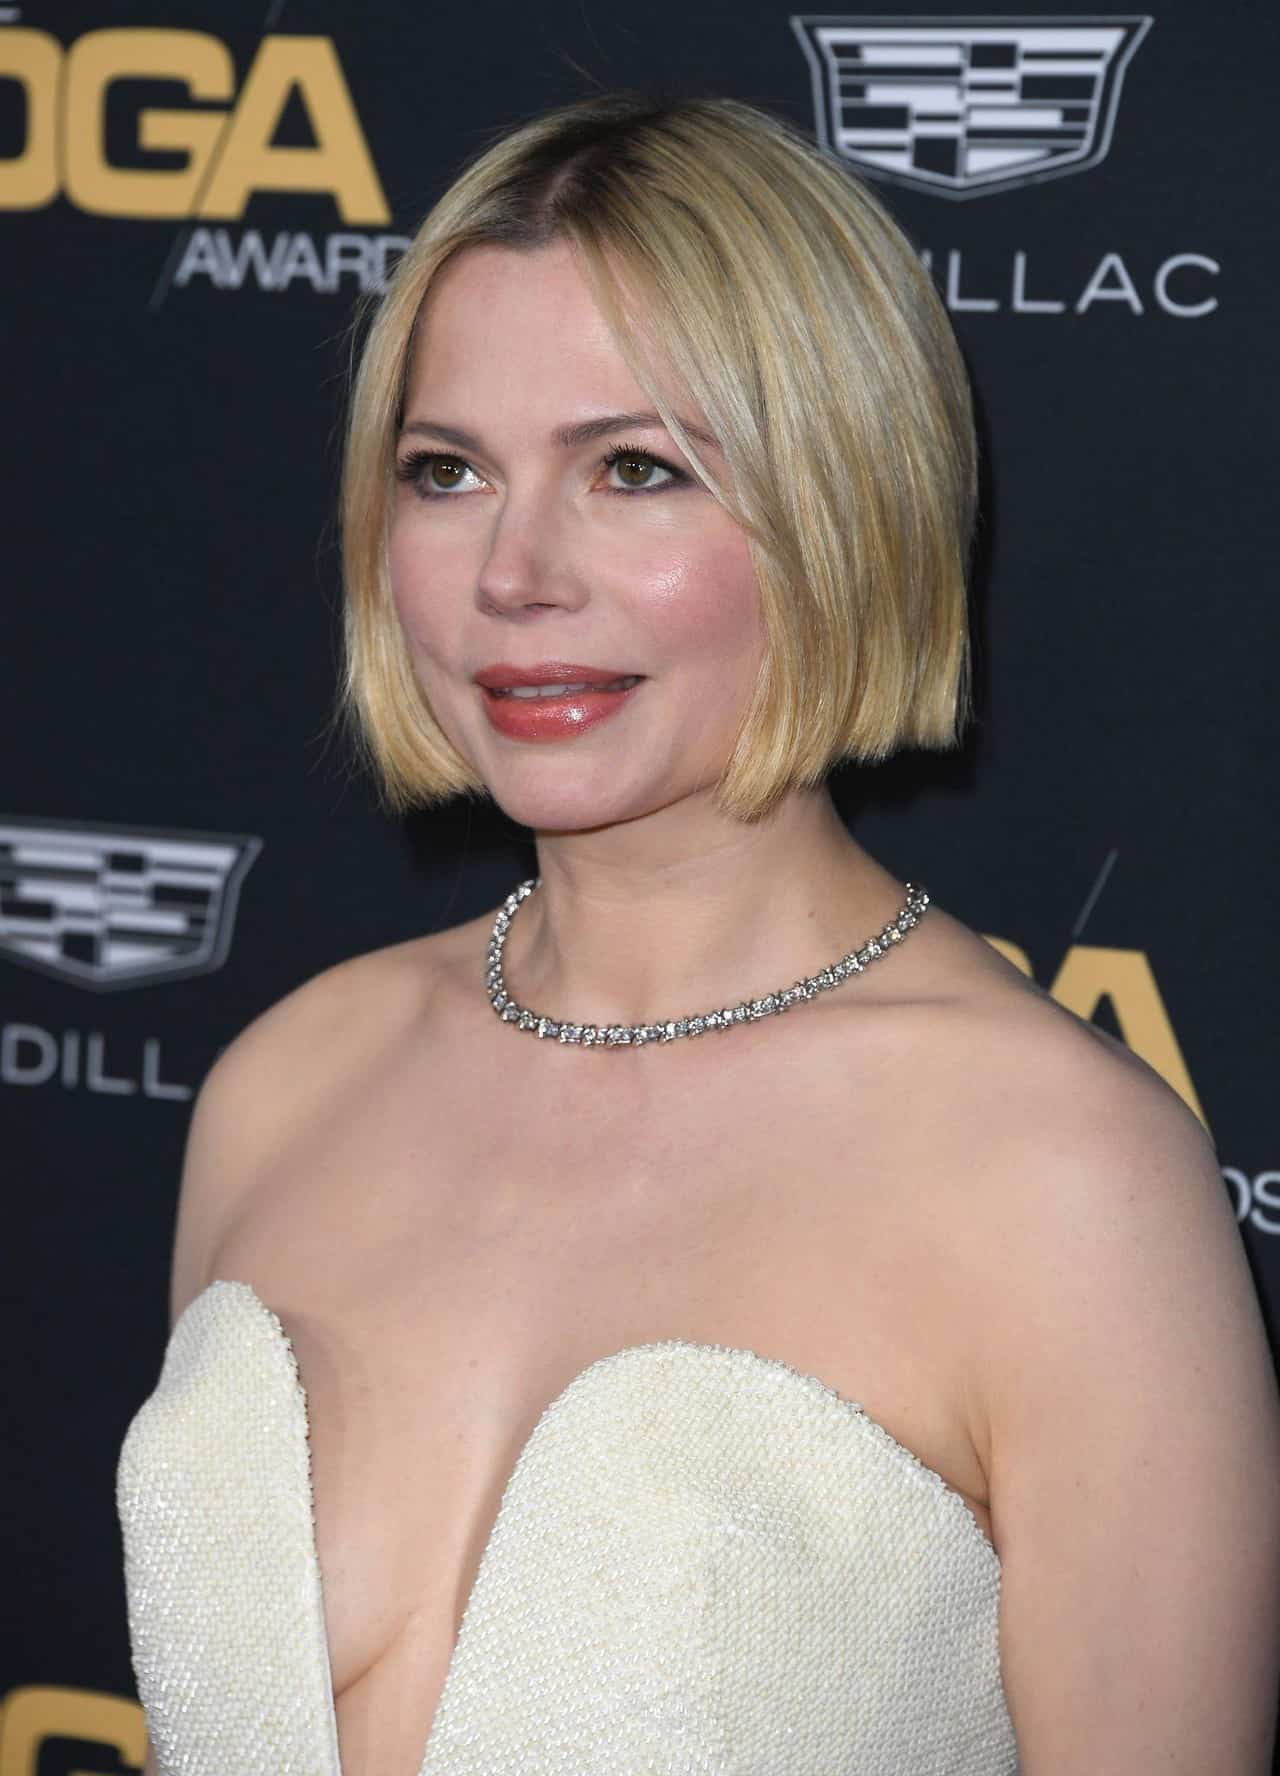 Michelle Williams Oozes Glamor in Cream Gown at 75th DGA Awards